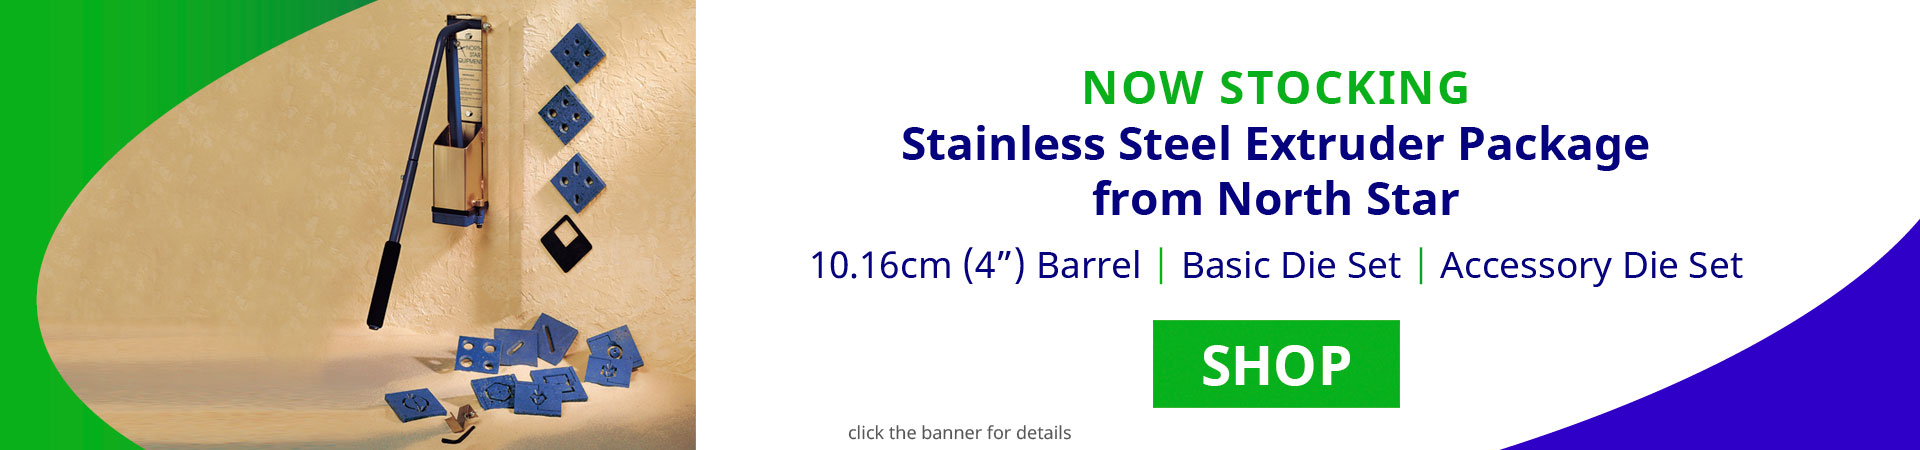 Now Available! North Star Stainless Steel Extruder Package